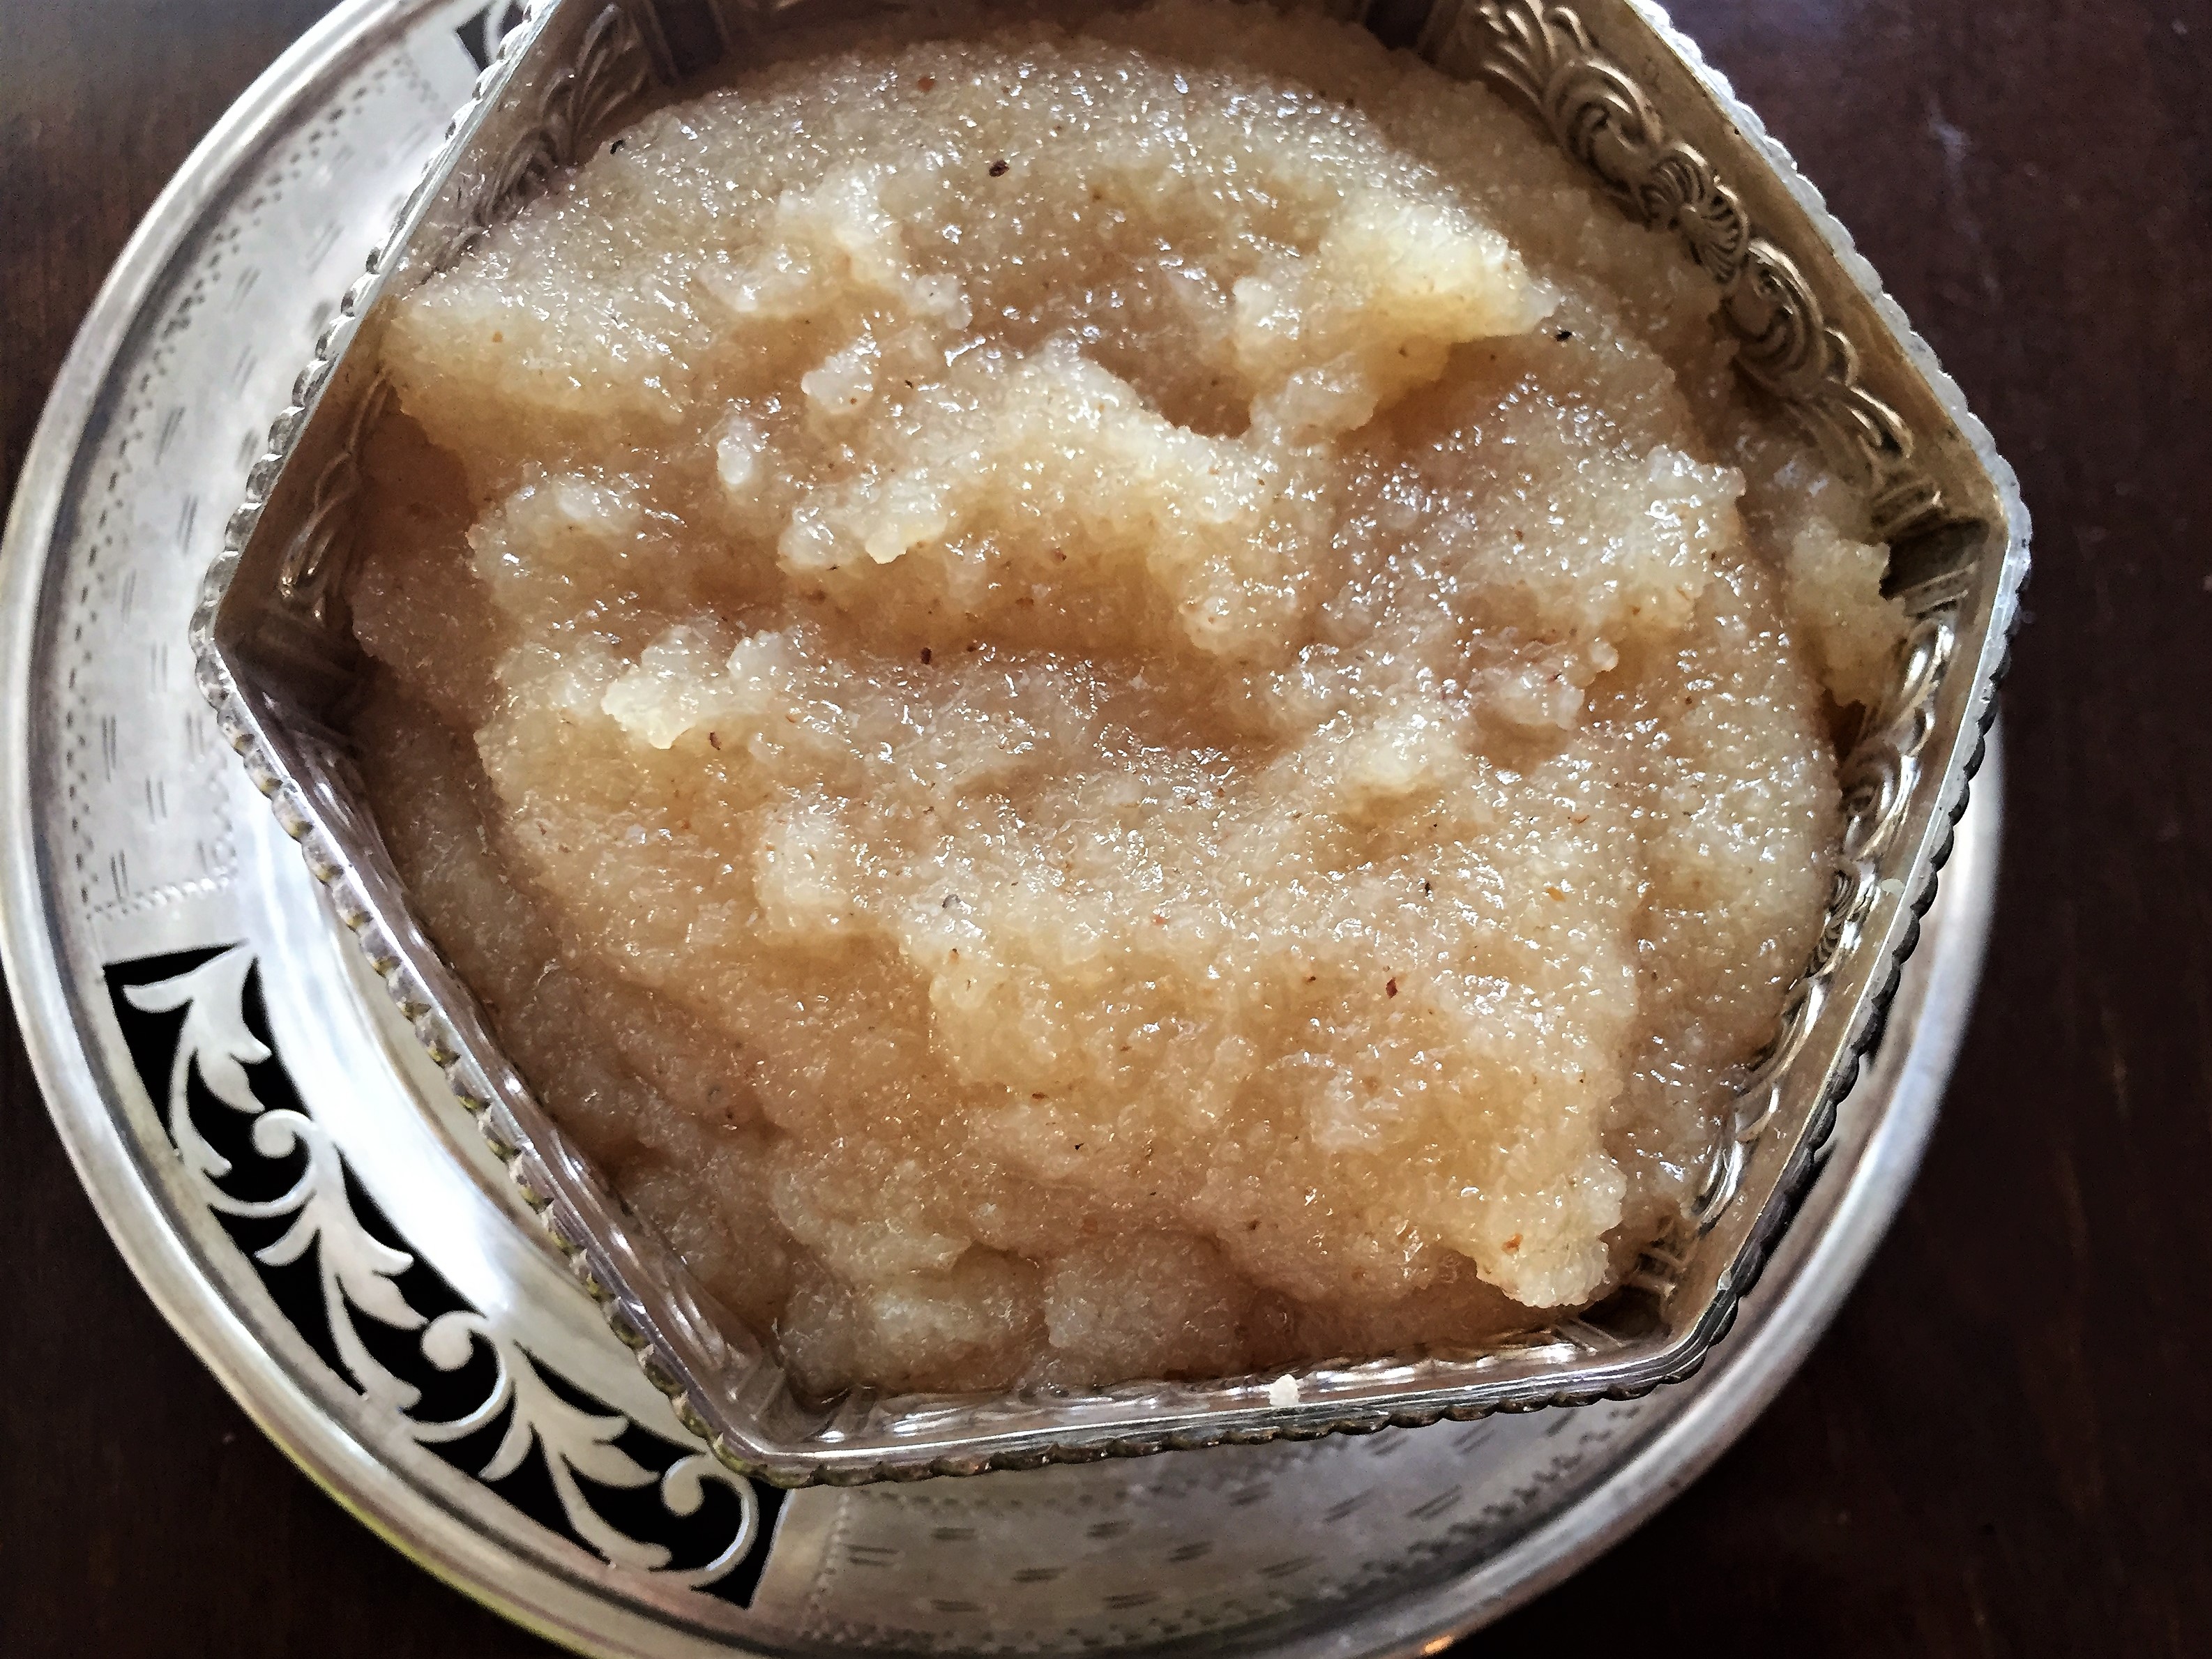 Sooji Hulva An Indian dessert made with ghee and cream of wheat